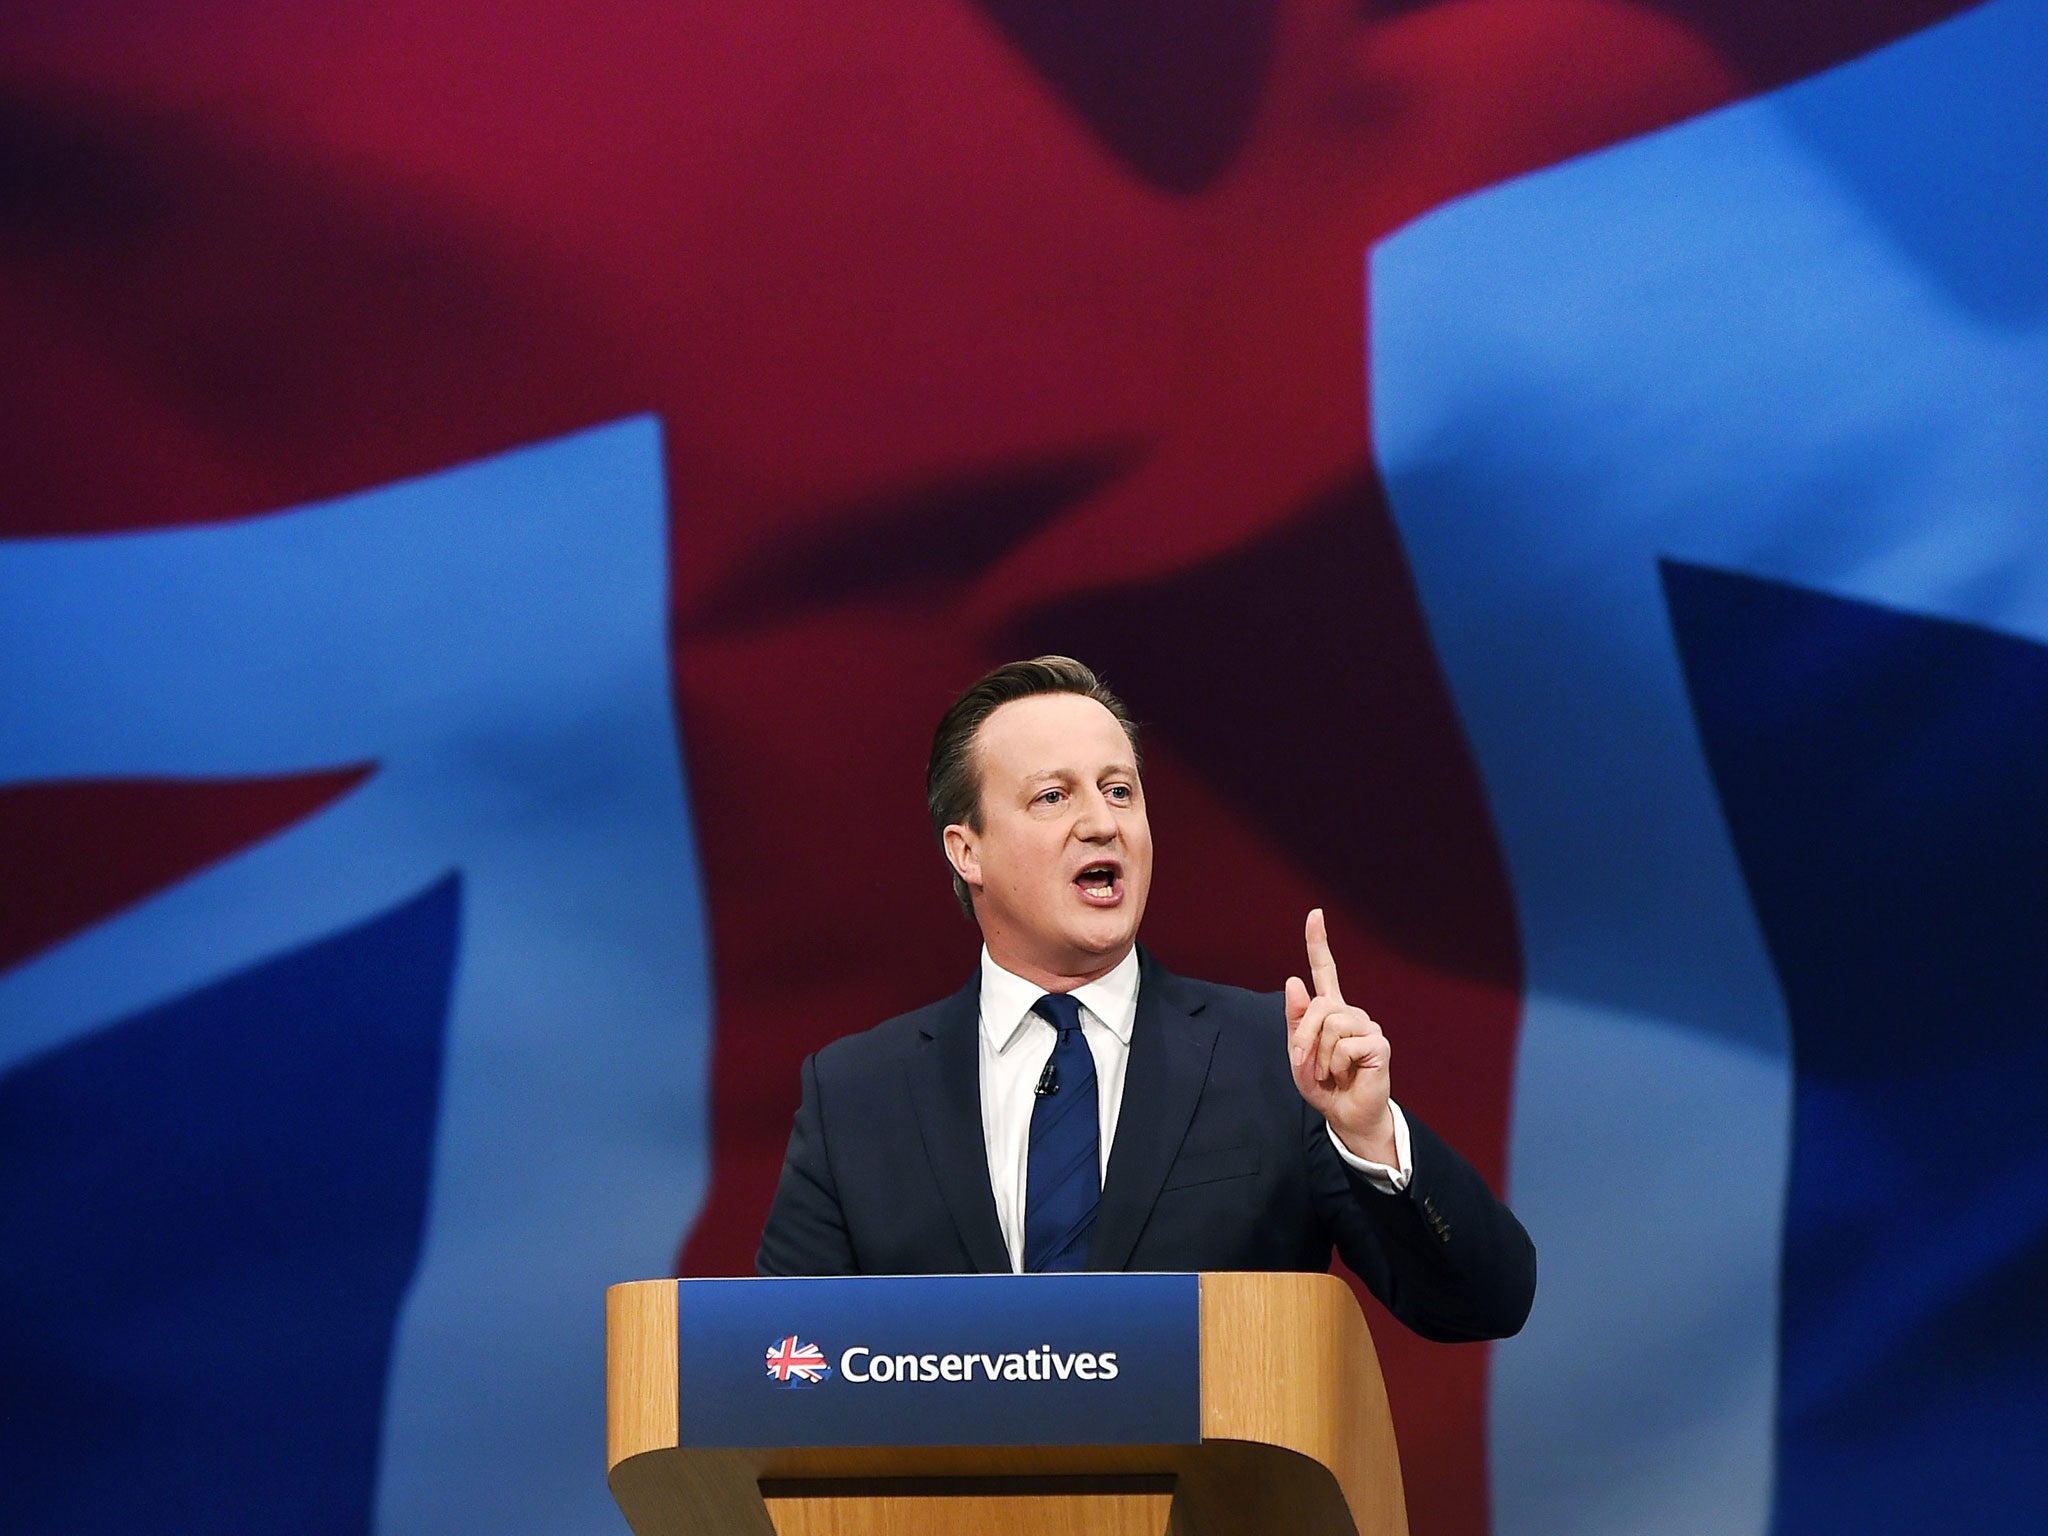 David Cameron delivers his keynote speech at the Conservative Party conference